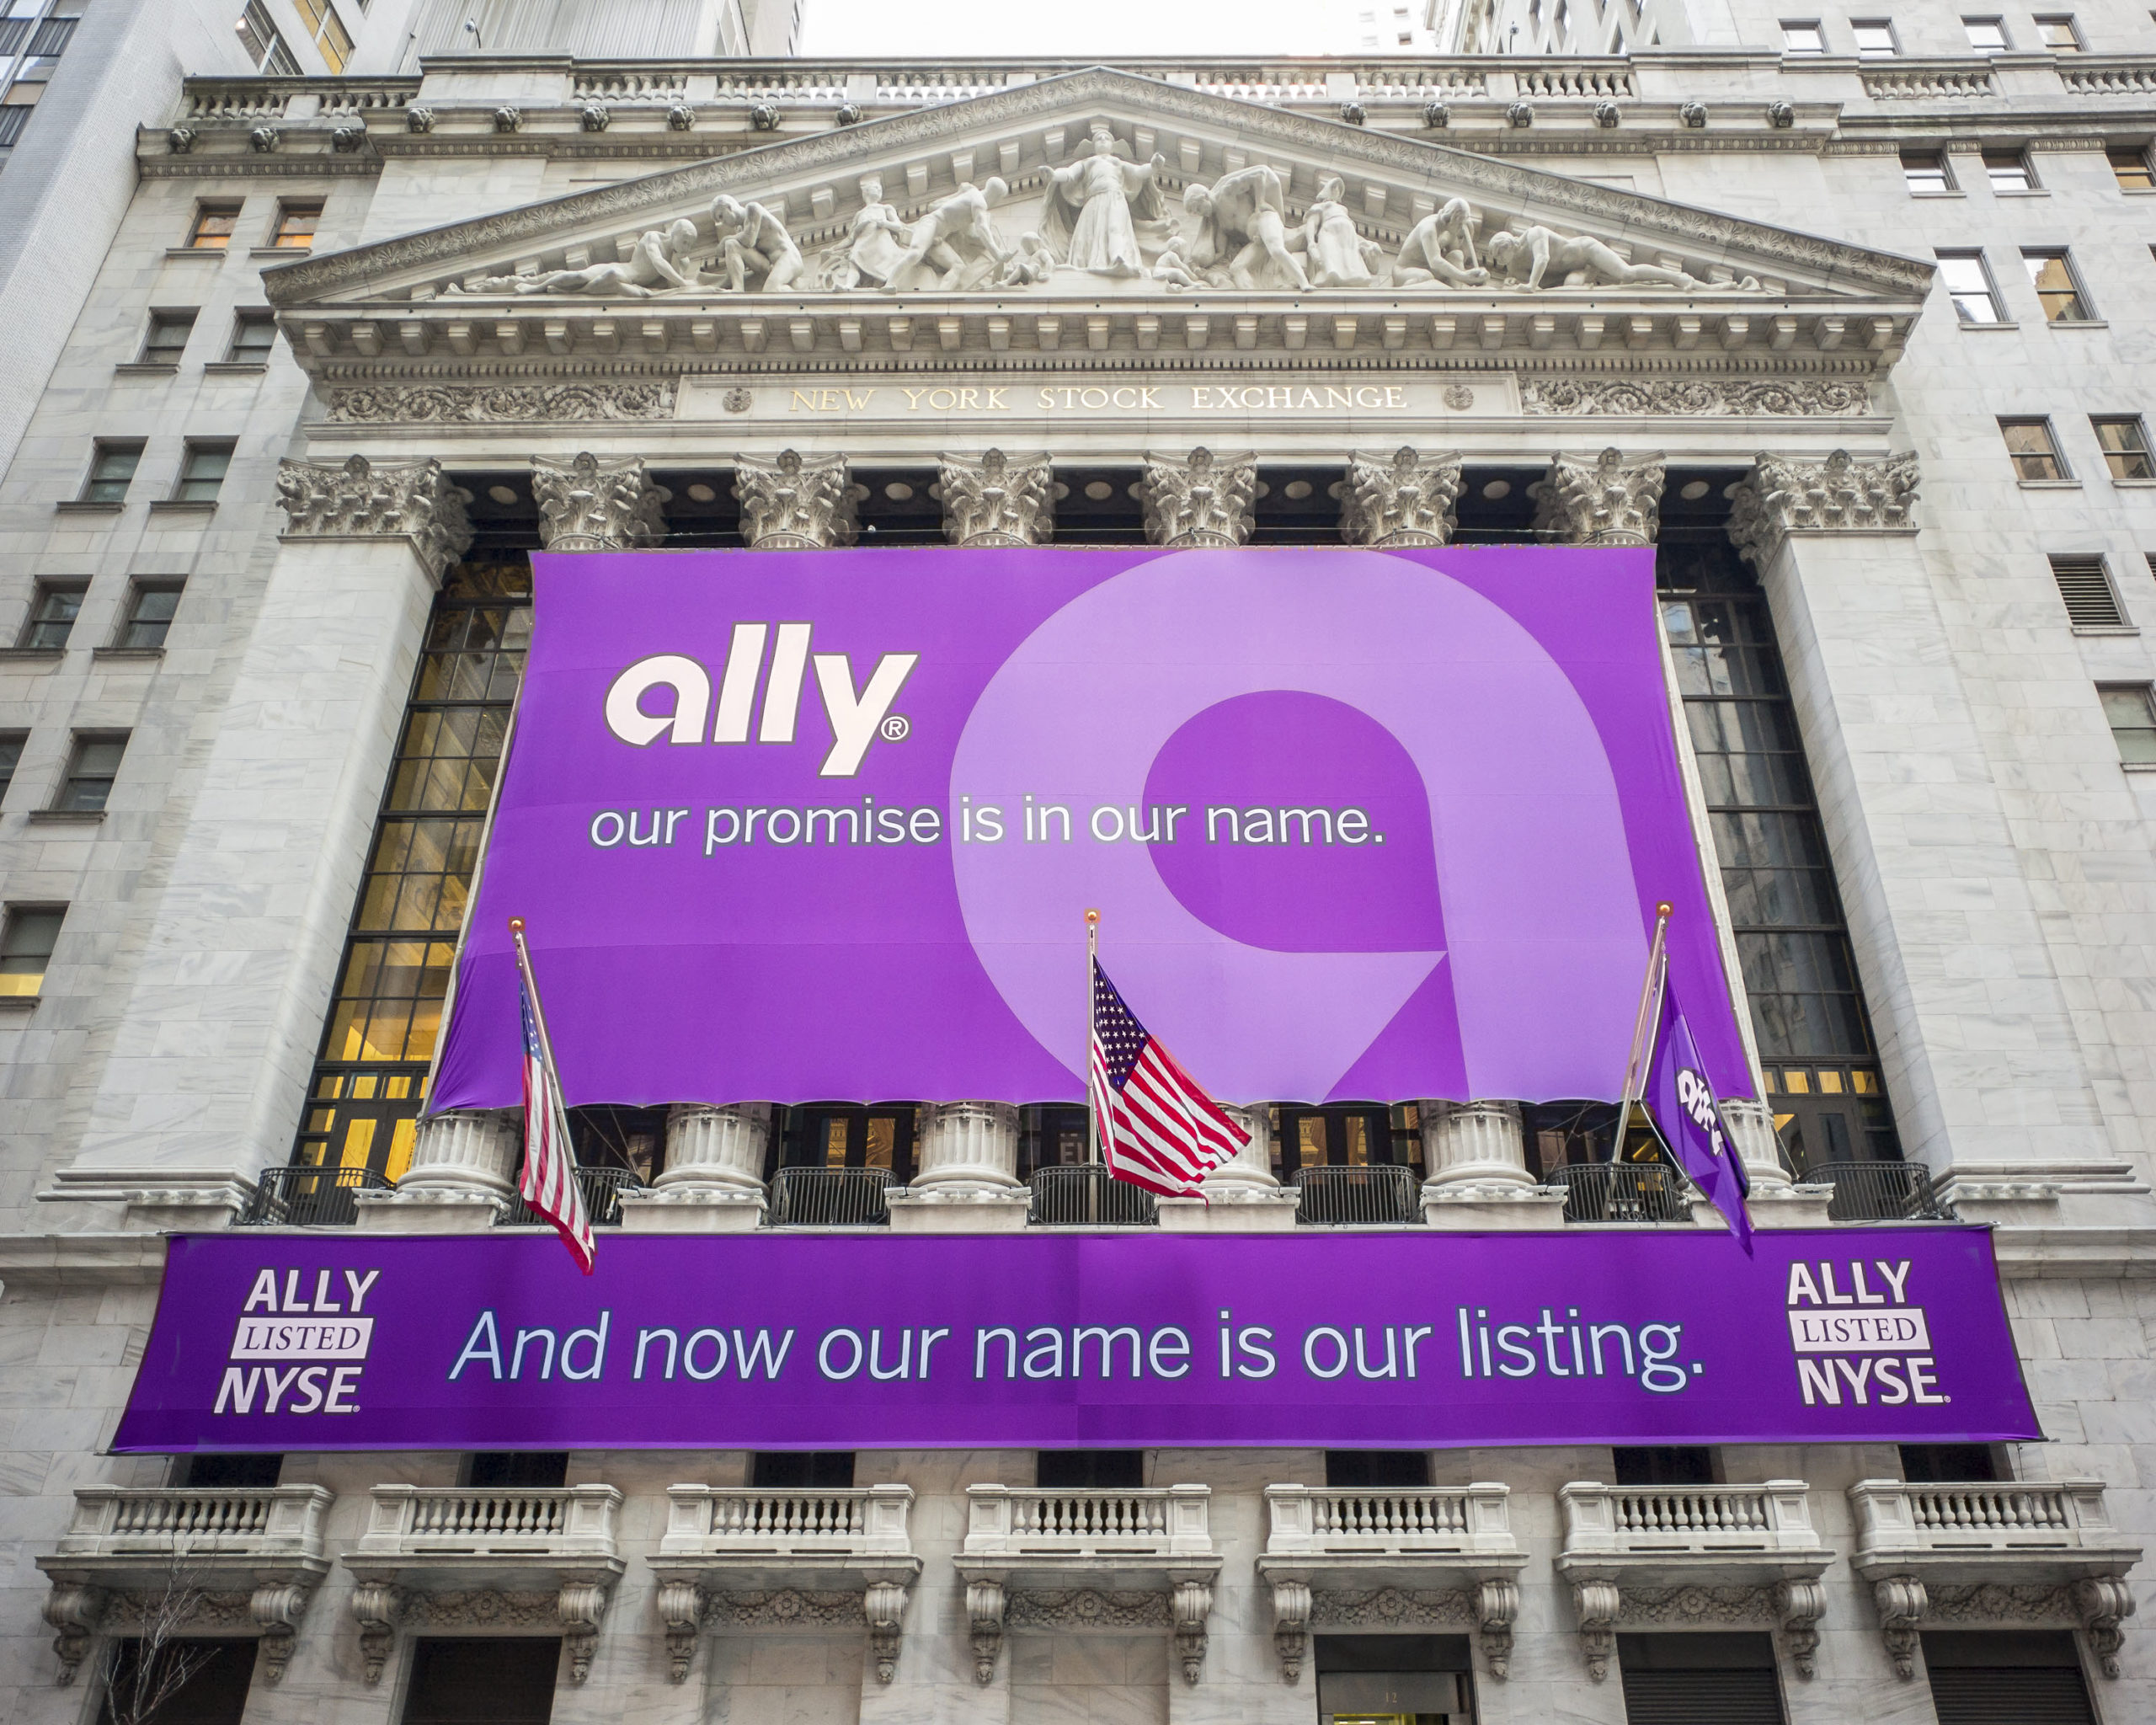 Ally's banner in front of the NYSE